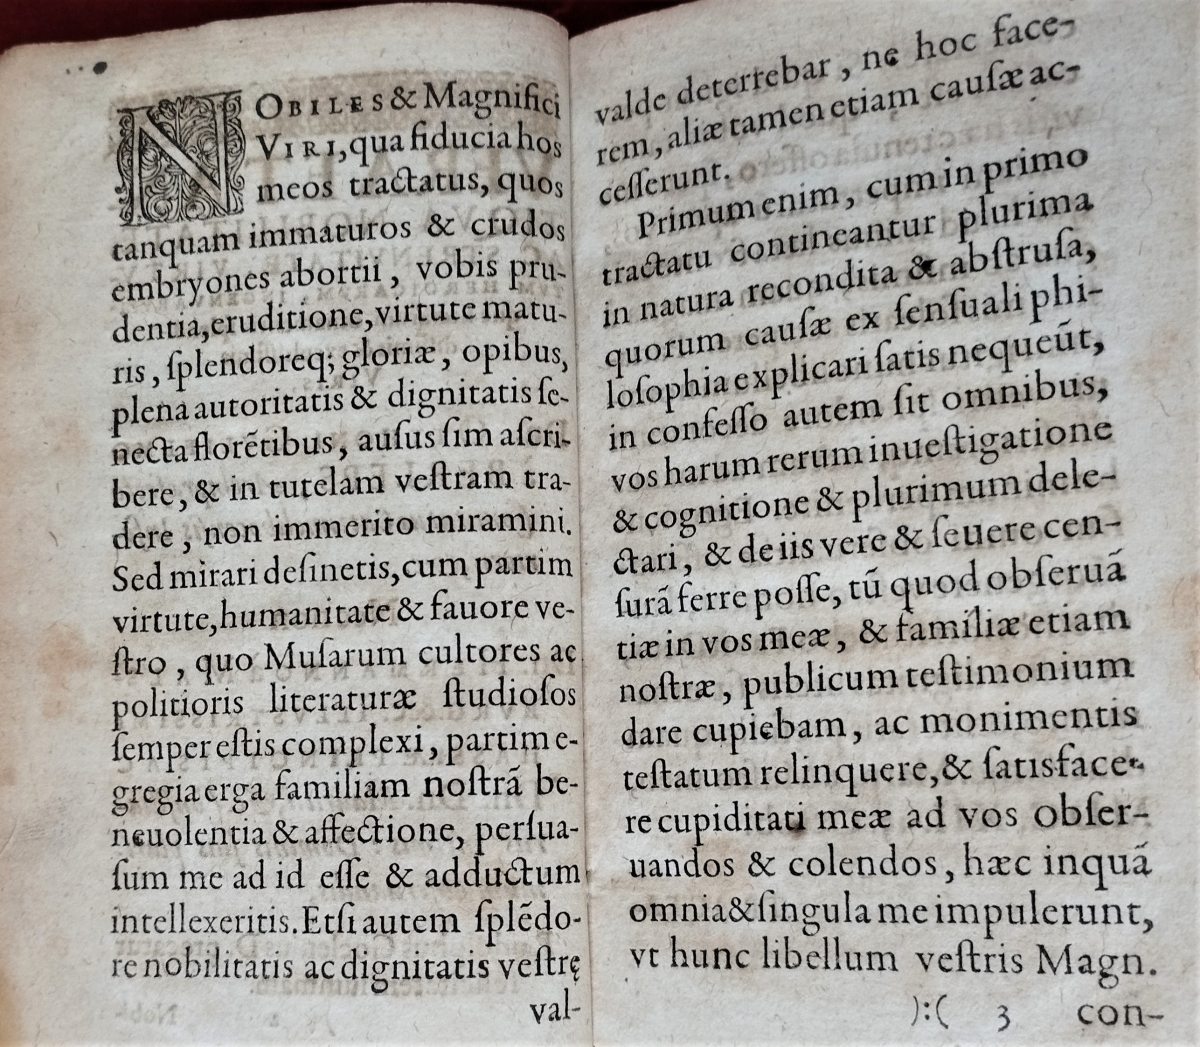 Two unnumbered pages in a 17th-century printed book, with a preface in Latin.